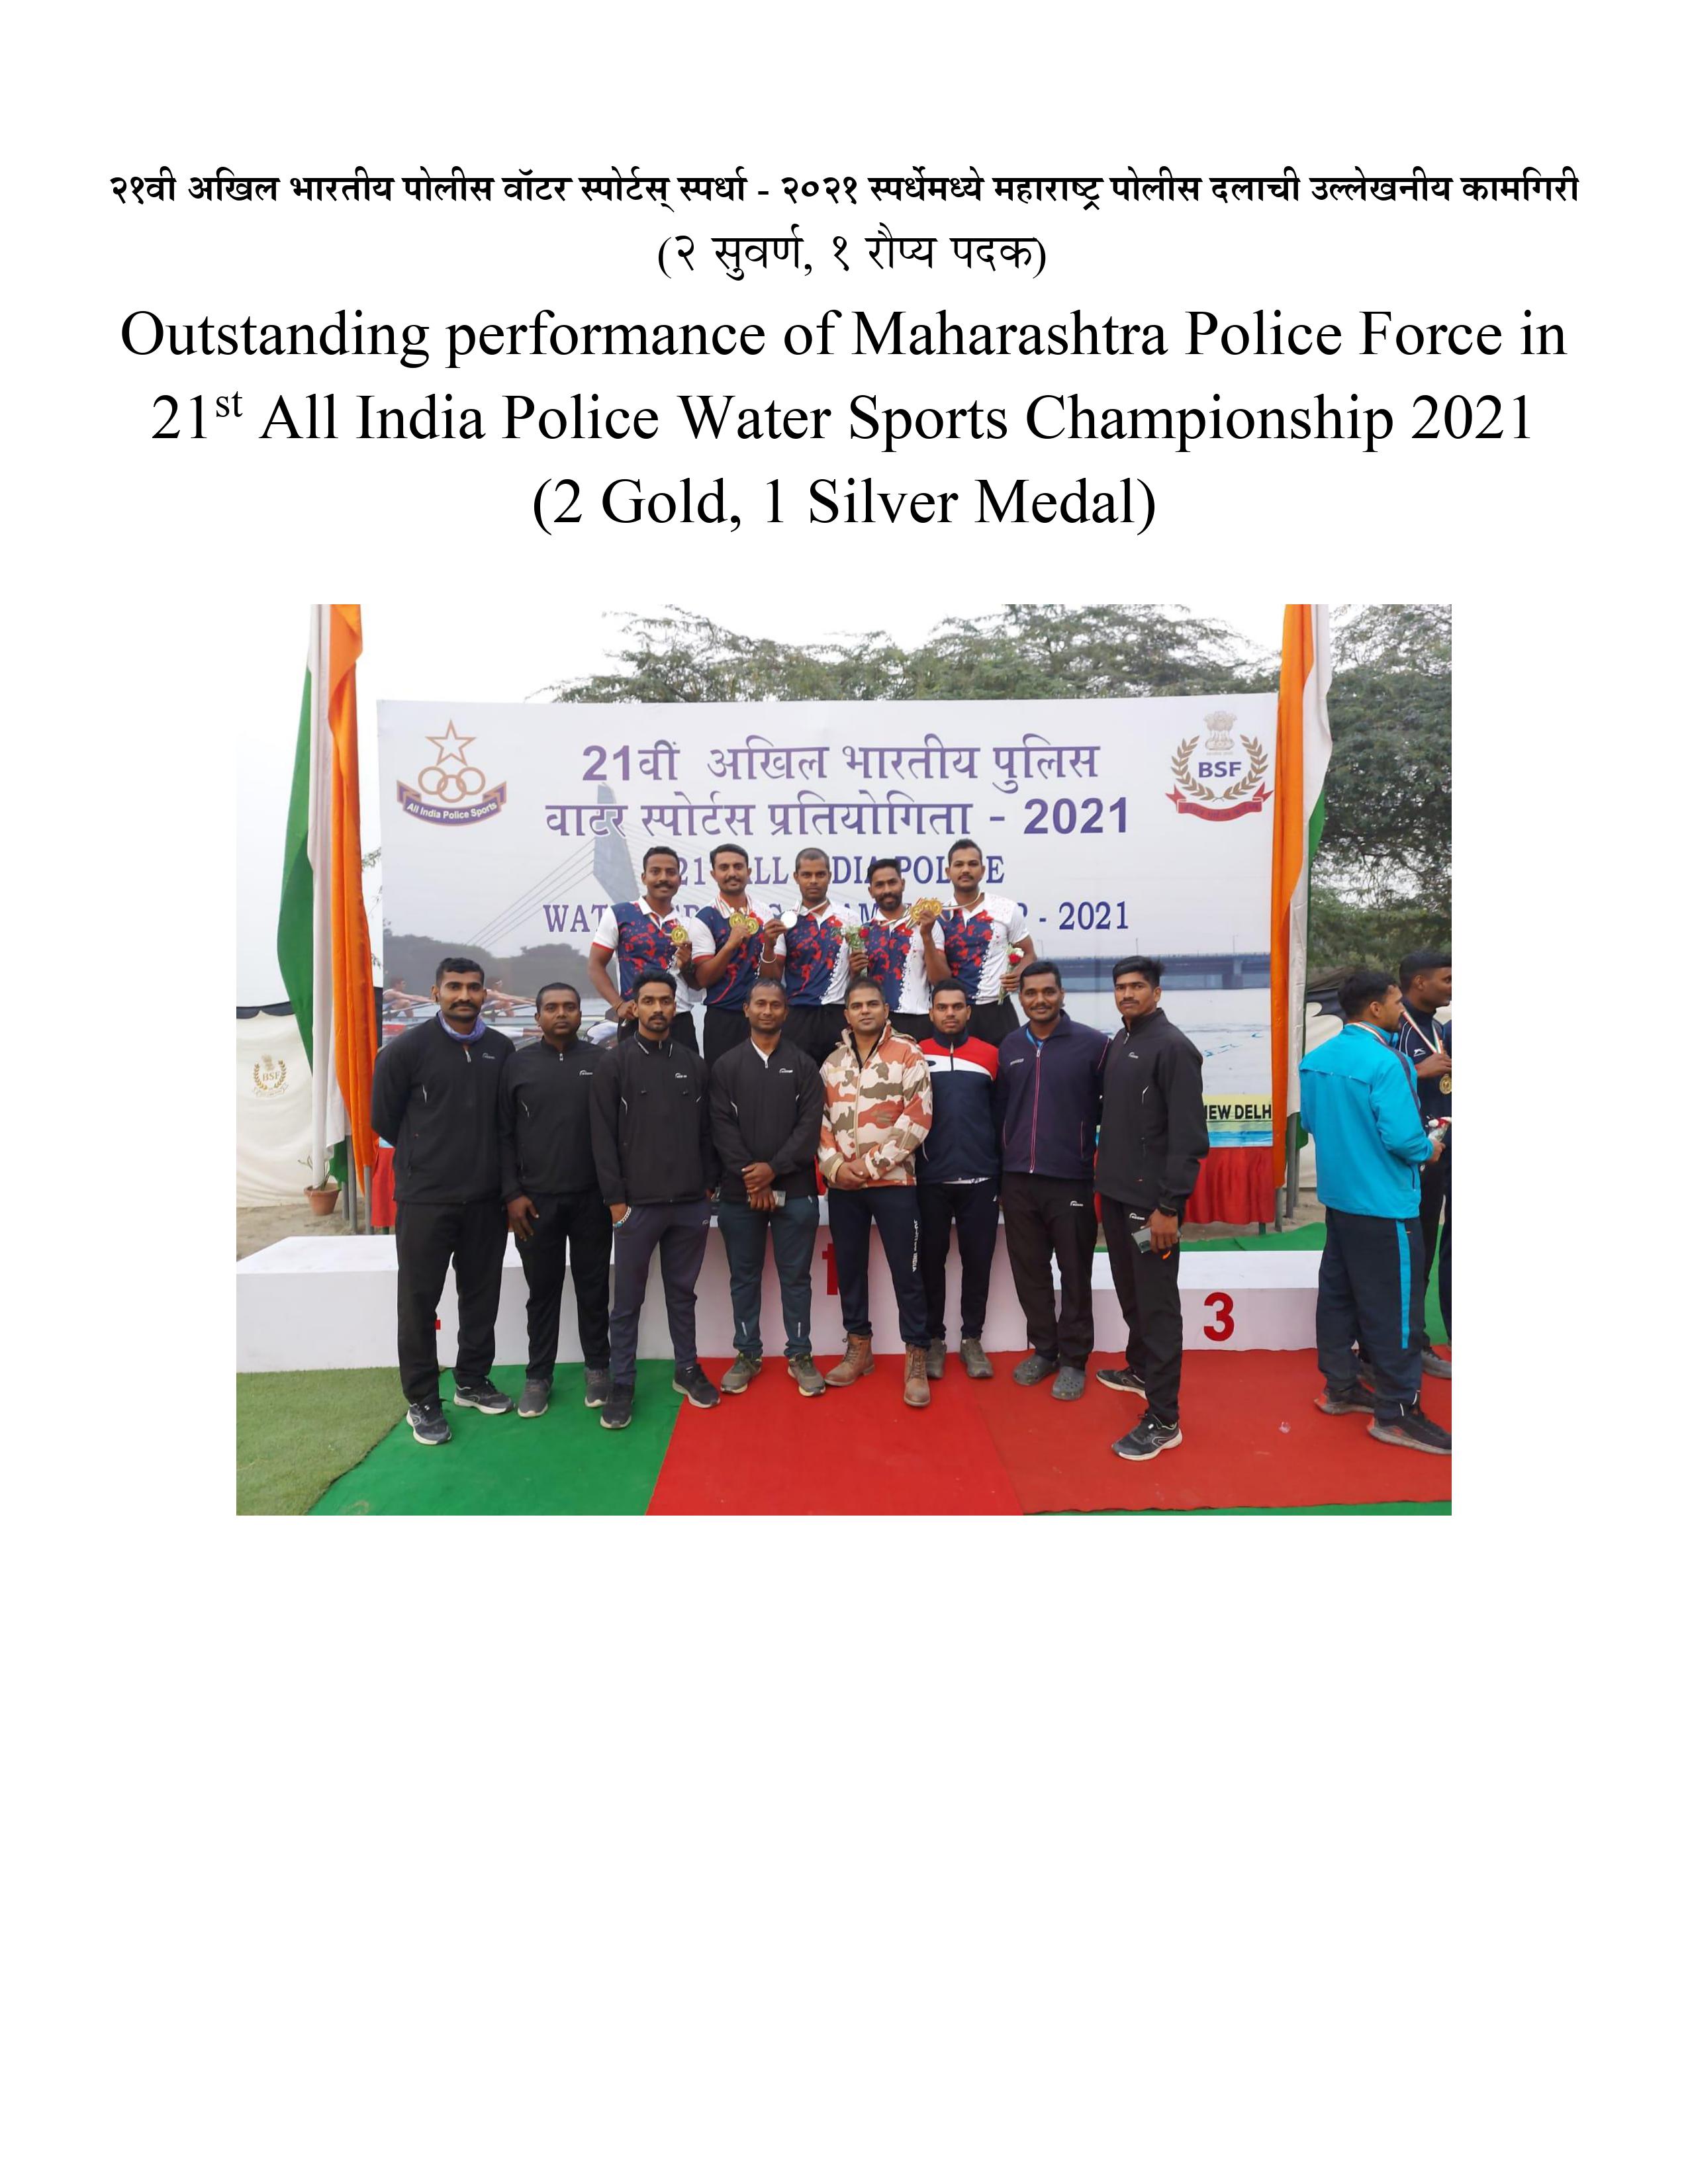 OUTSTANDING PERFORMANCE OF MAHARASHTRA  POLICE FORCE IN 21st ALL INDIA POLICE WATER SPORTS CHAMPIONSHIP 2021.